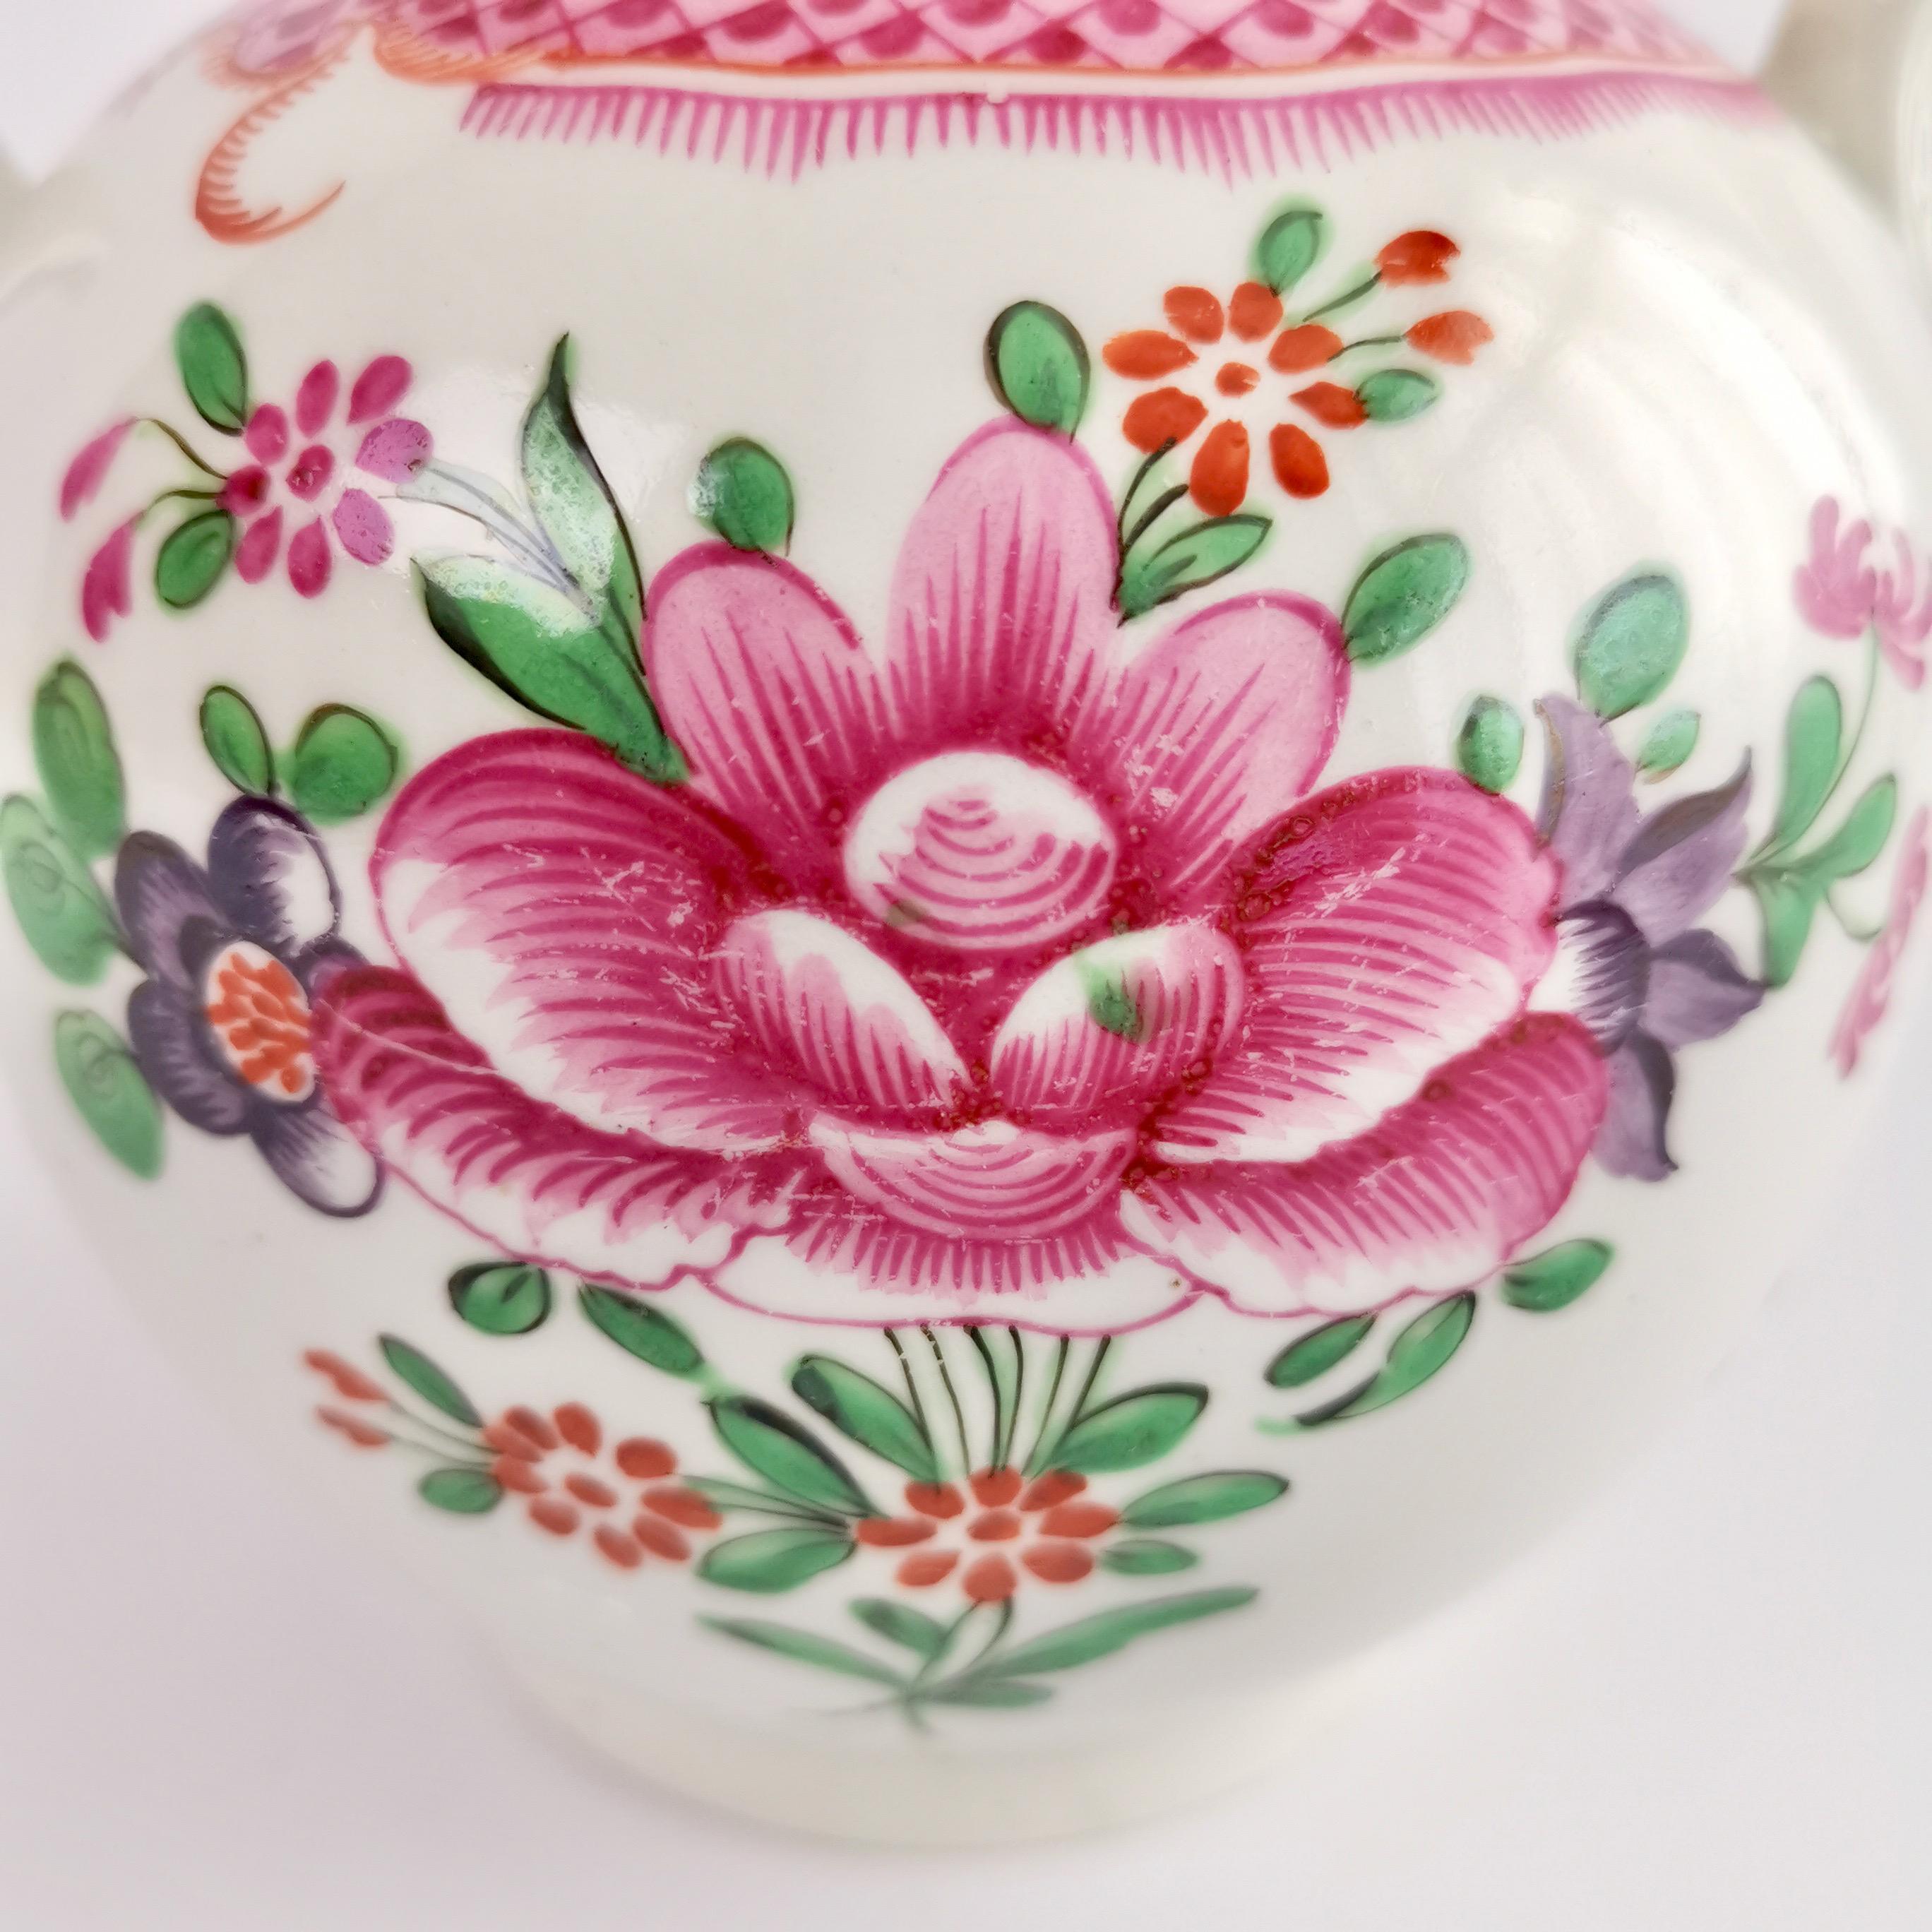 Caughley Porcelain Teapot, Pink Floral Compagnie des Indes, ca 1785 In Good Condition For Sale In London, GB